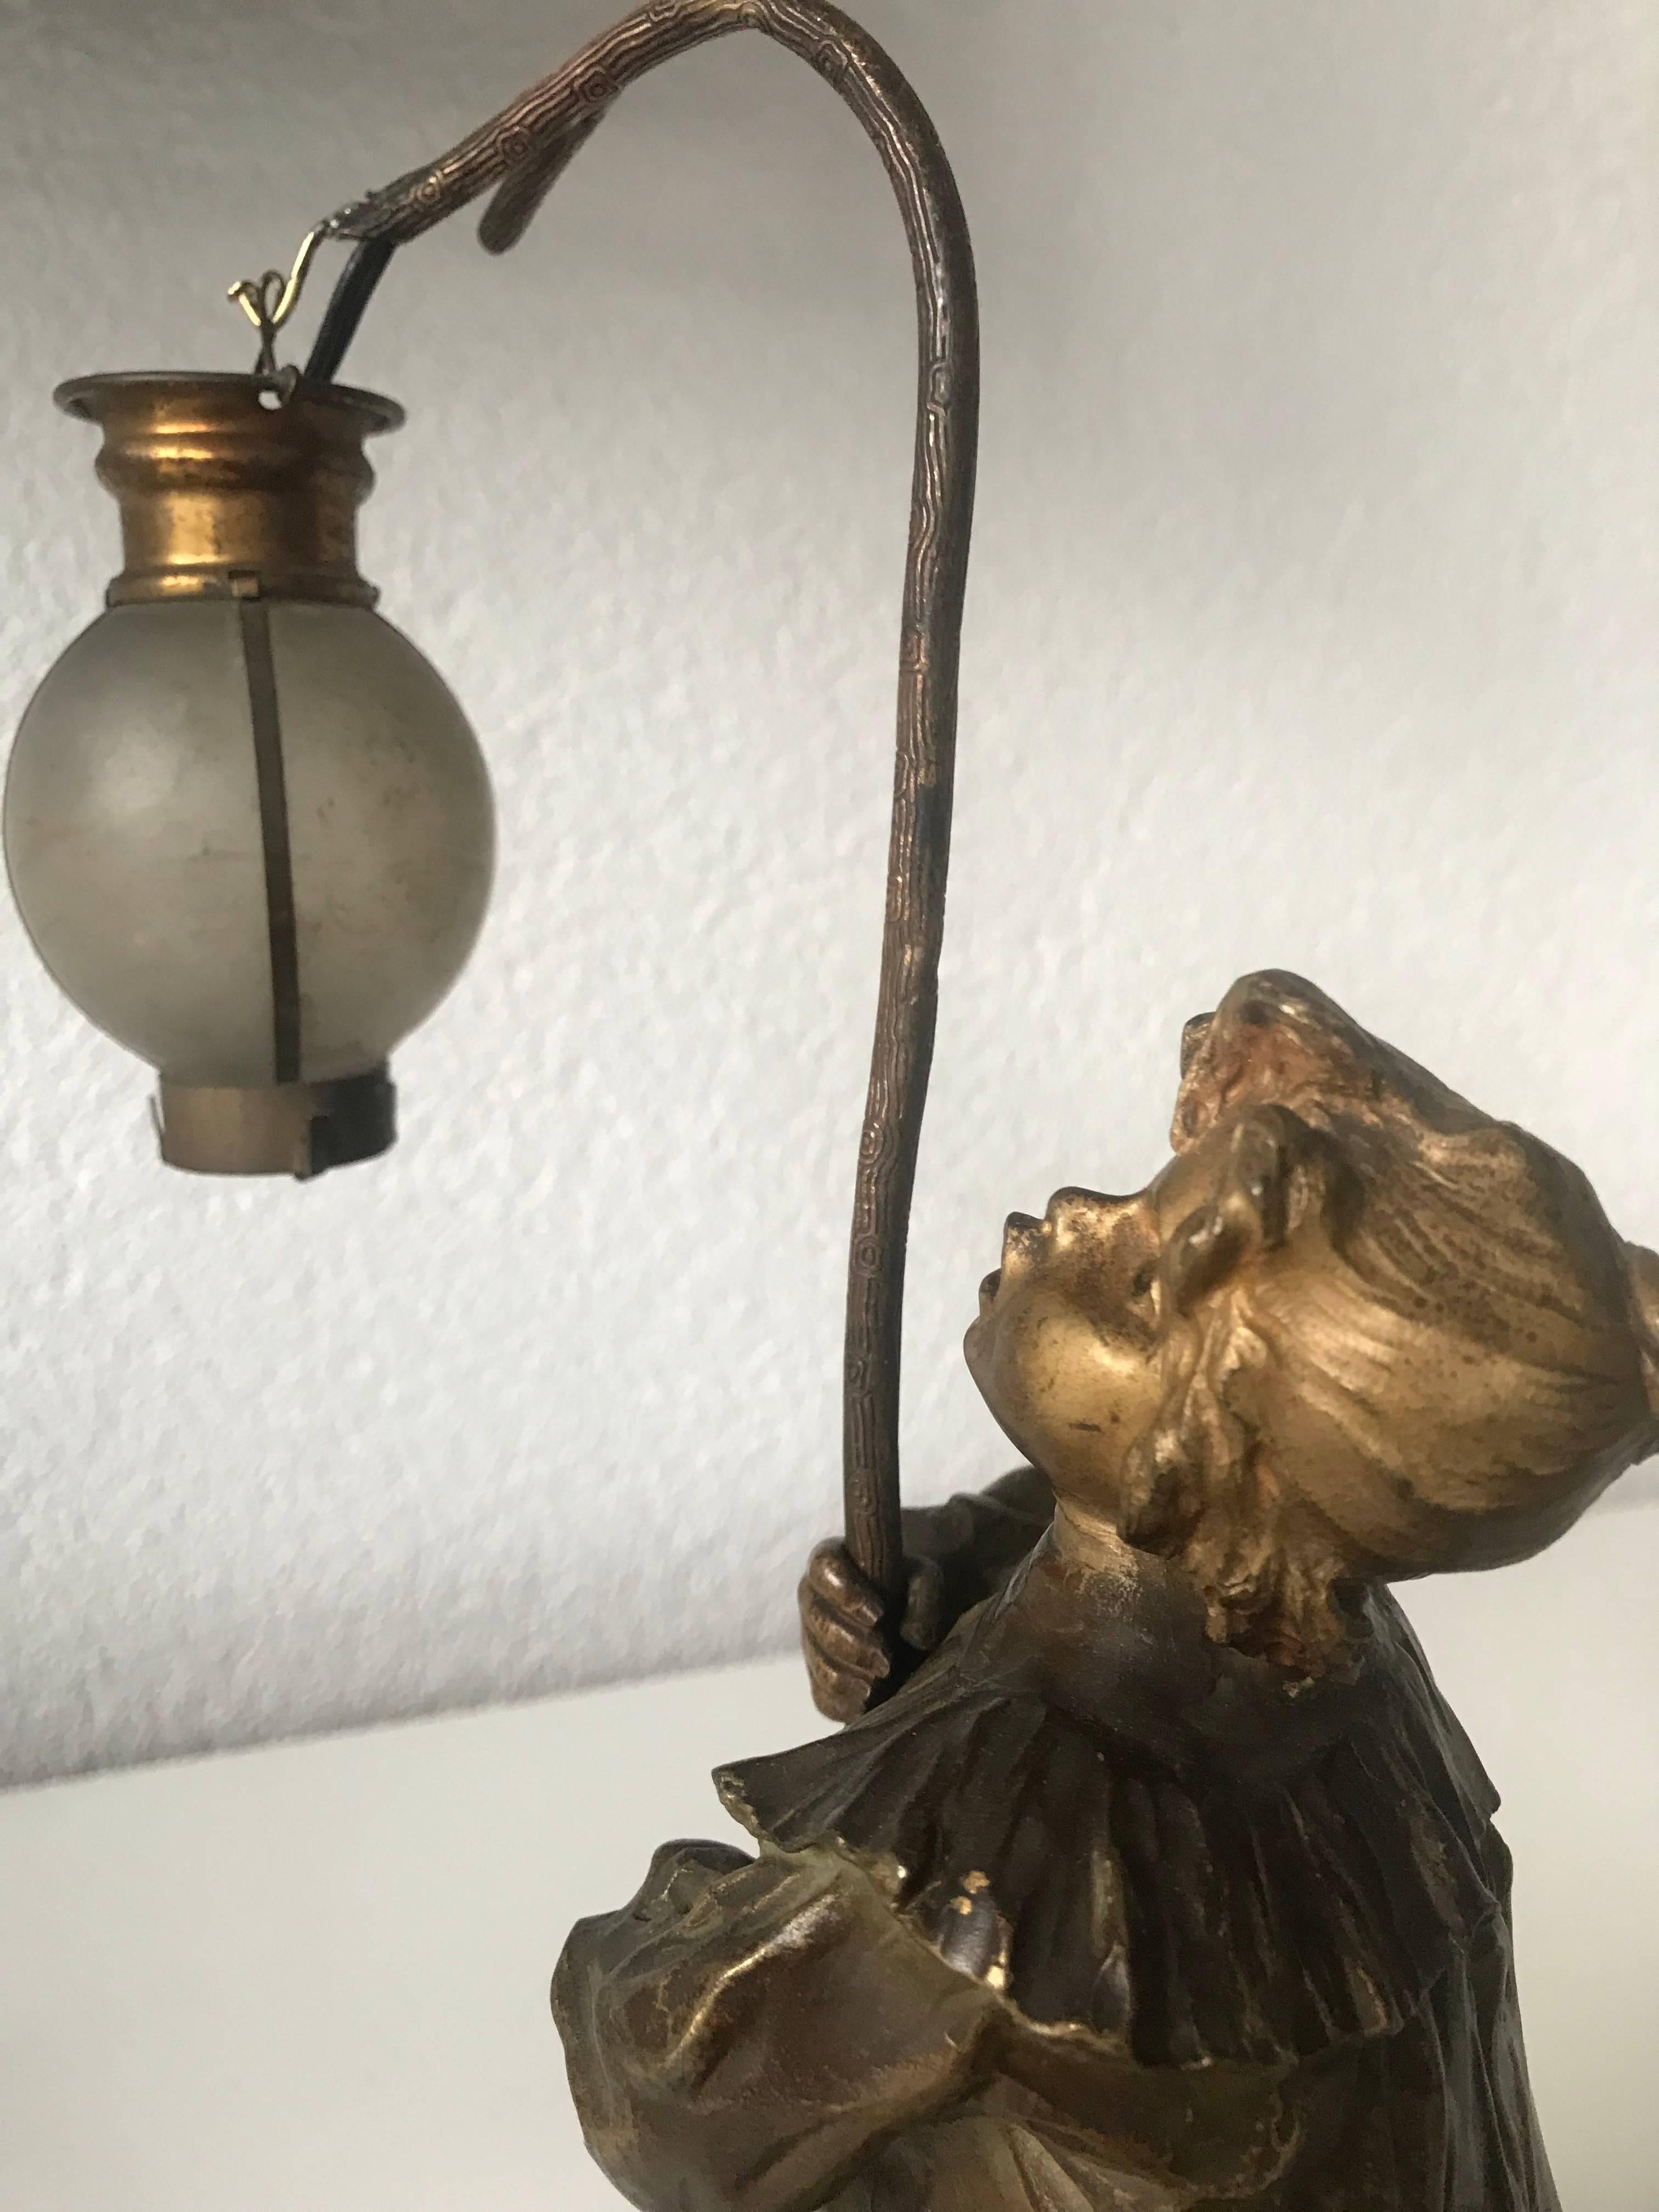 Rare en wonderful quality, sculptural table lamp. 

This antique, Art Nouveau table or desk lamp embodies everything we love about art and antiques. The beautiful and realistic girl sculpture is a true work of art and she is in excellent condition.